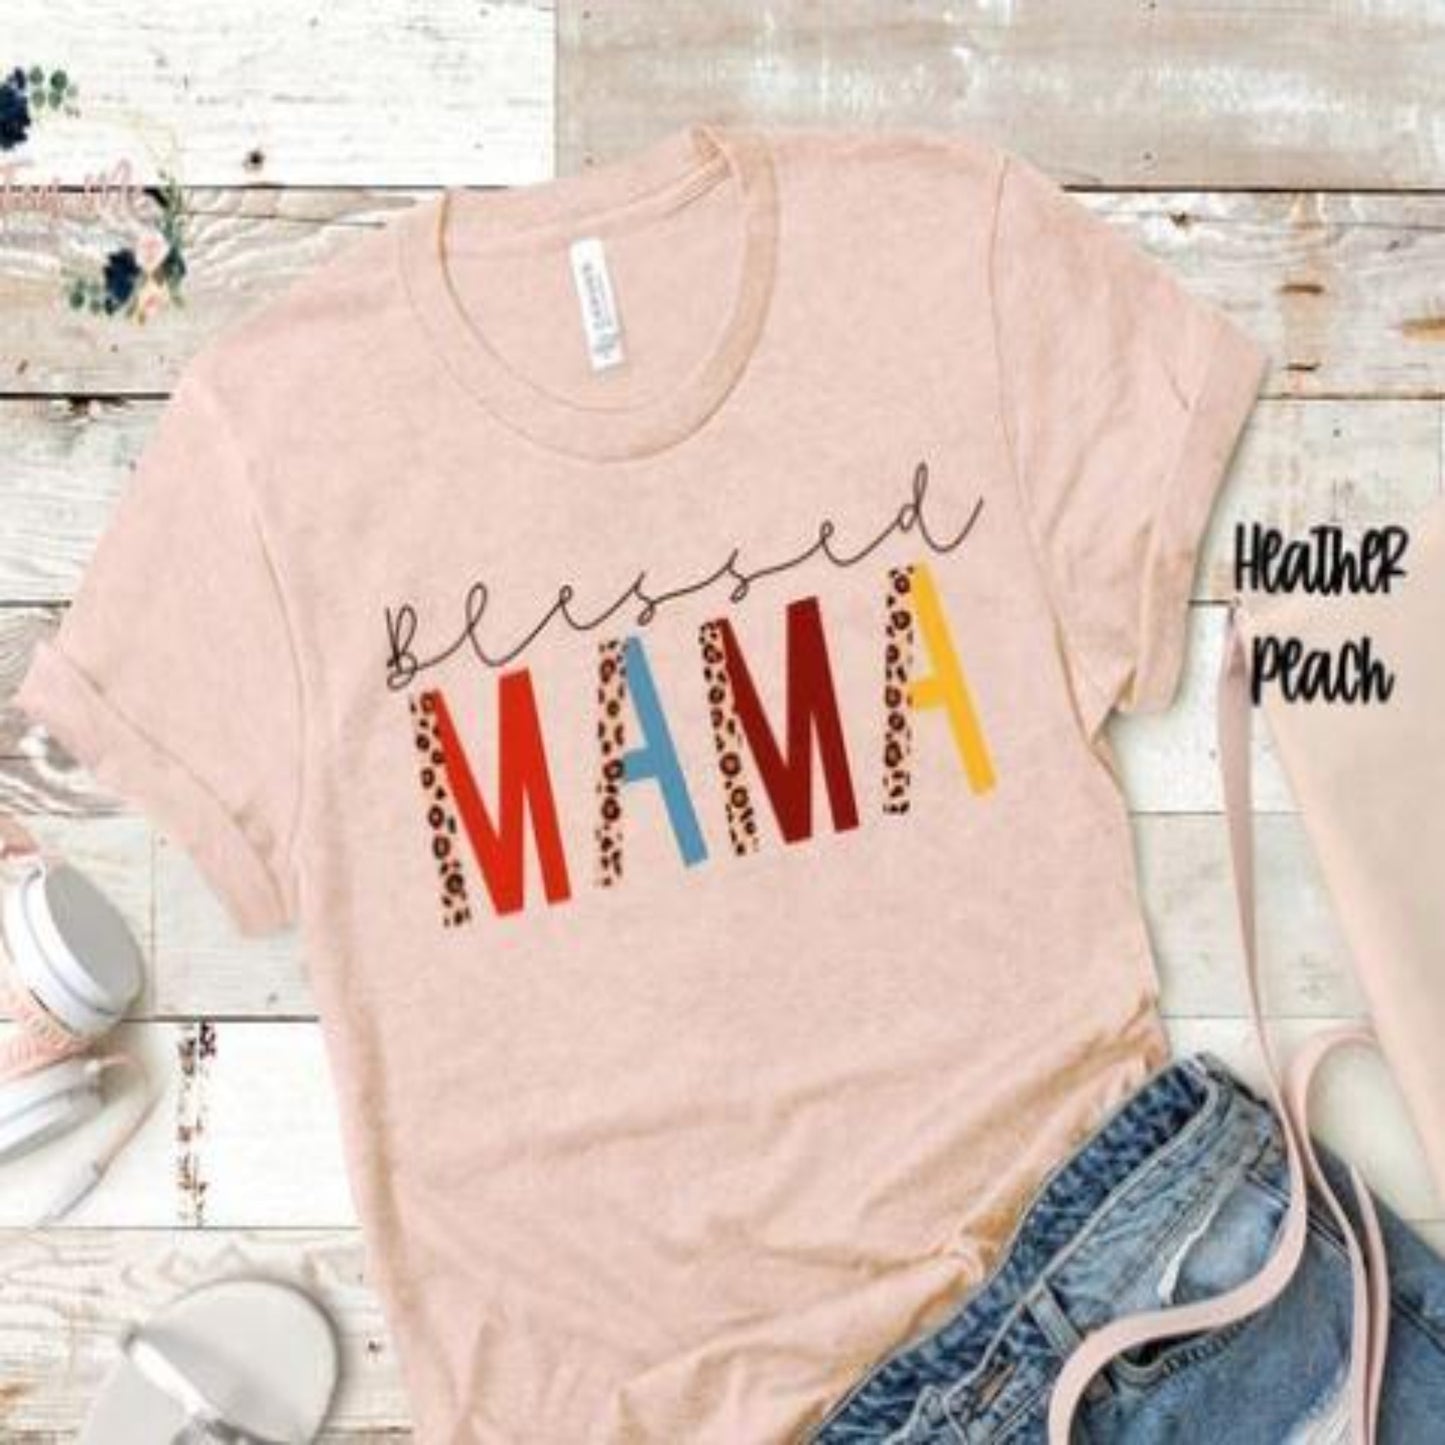 blessed_mama specialty tee everyday tshirt casual shirt